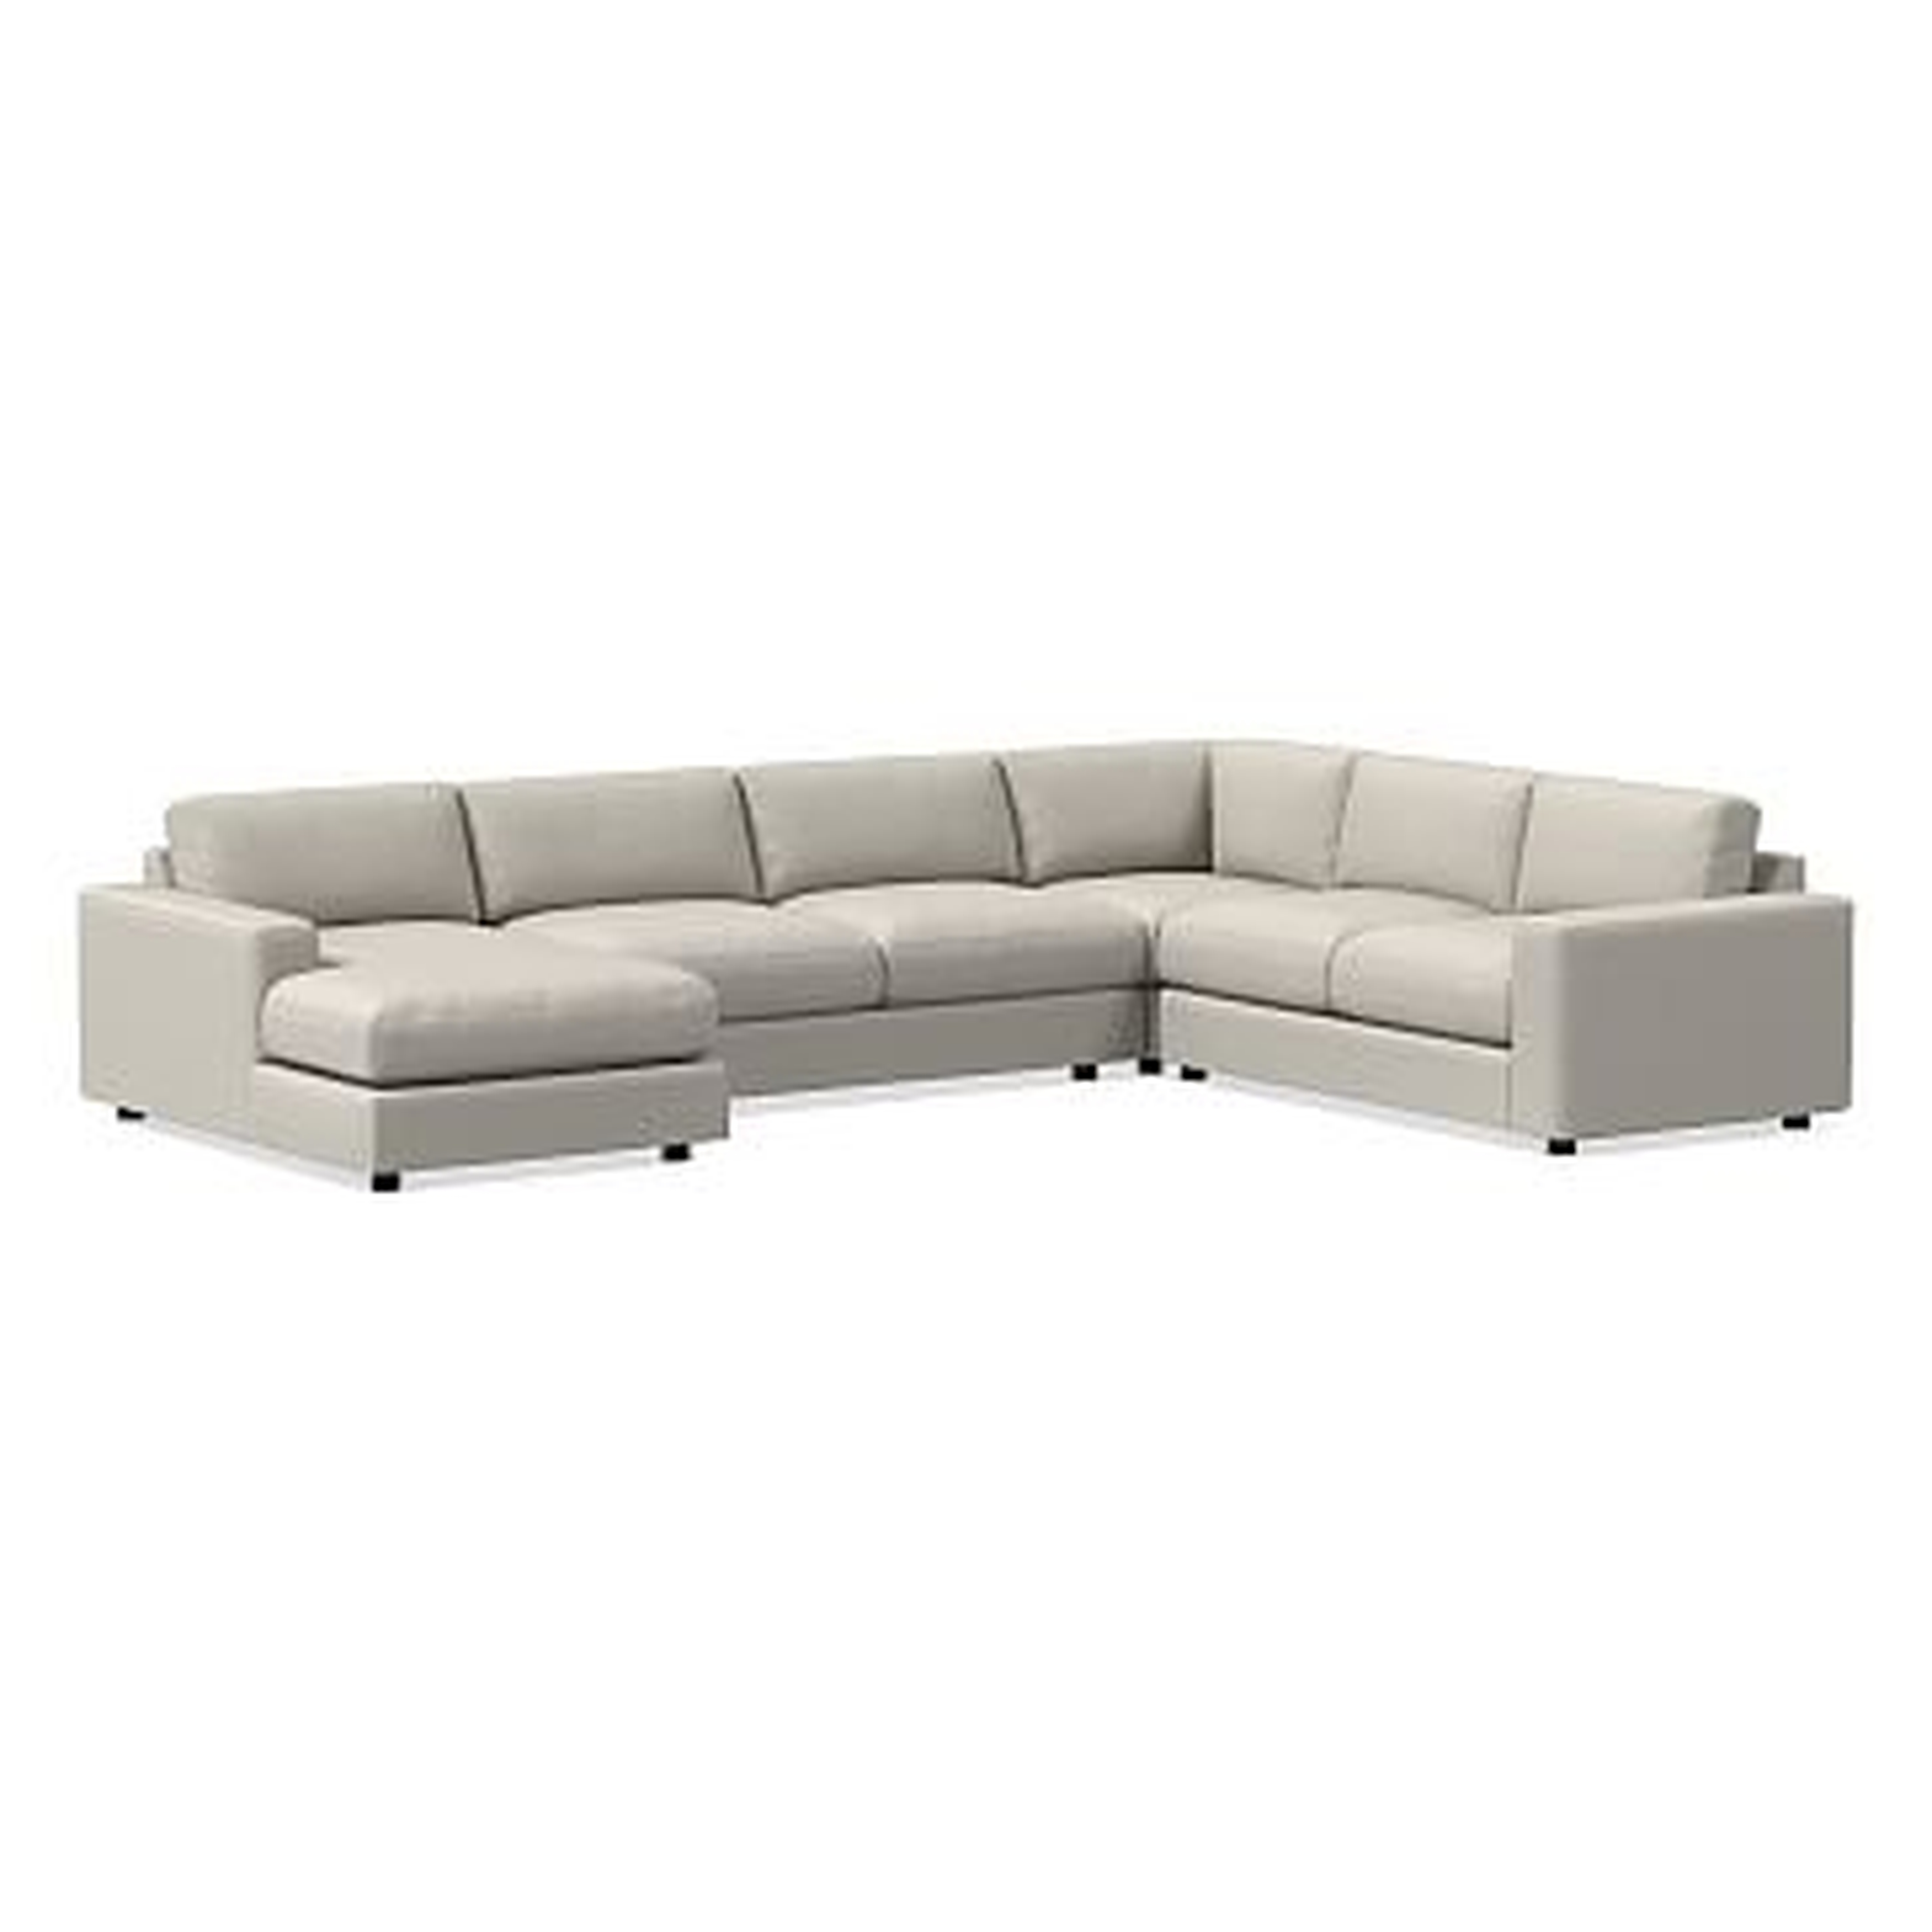 Urban Sectional Set 10: Right Arm 2 Seater Sofa, Corner, Armless 2 Seater, Left Arm Chaise, Poly, Performance Twill, Stone - West Elm